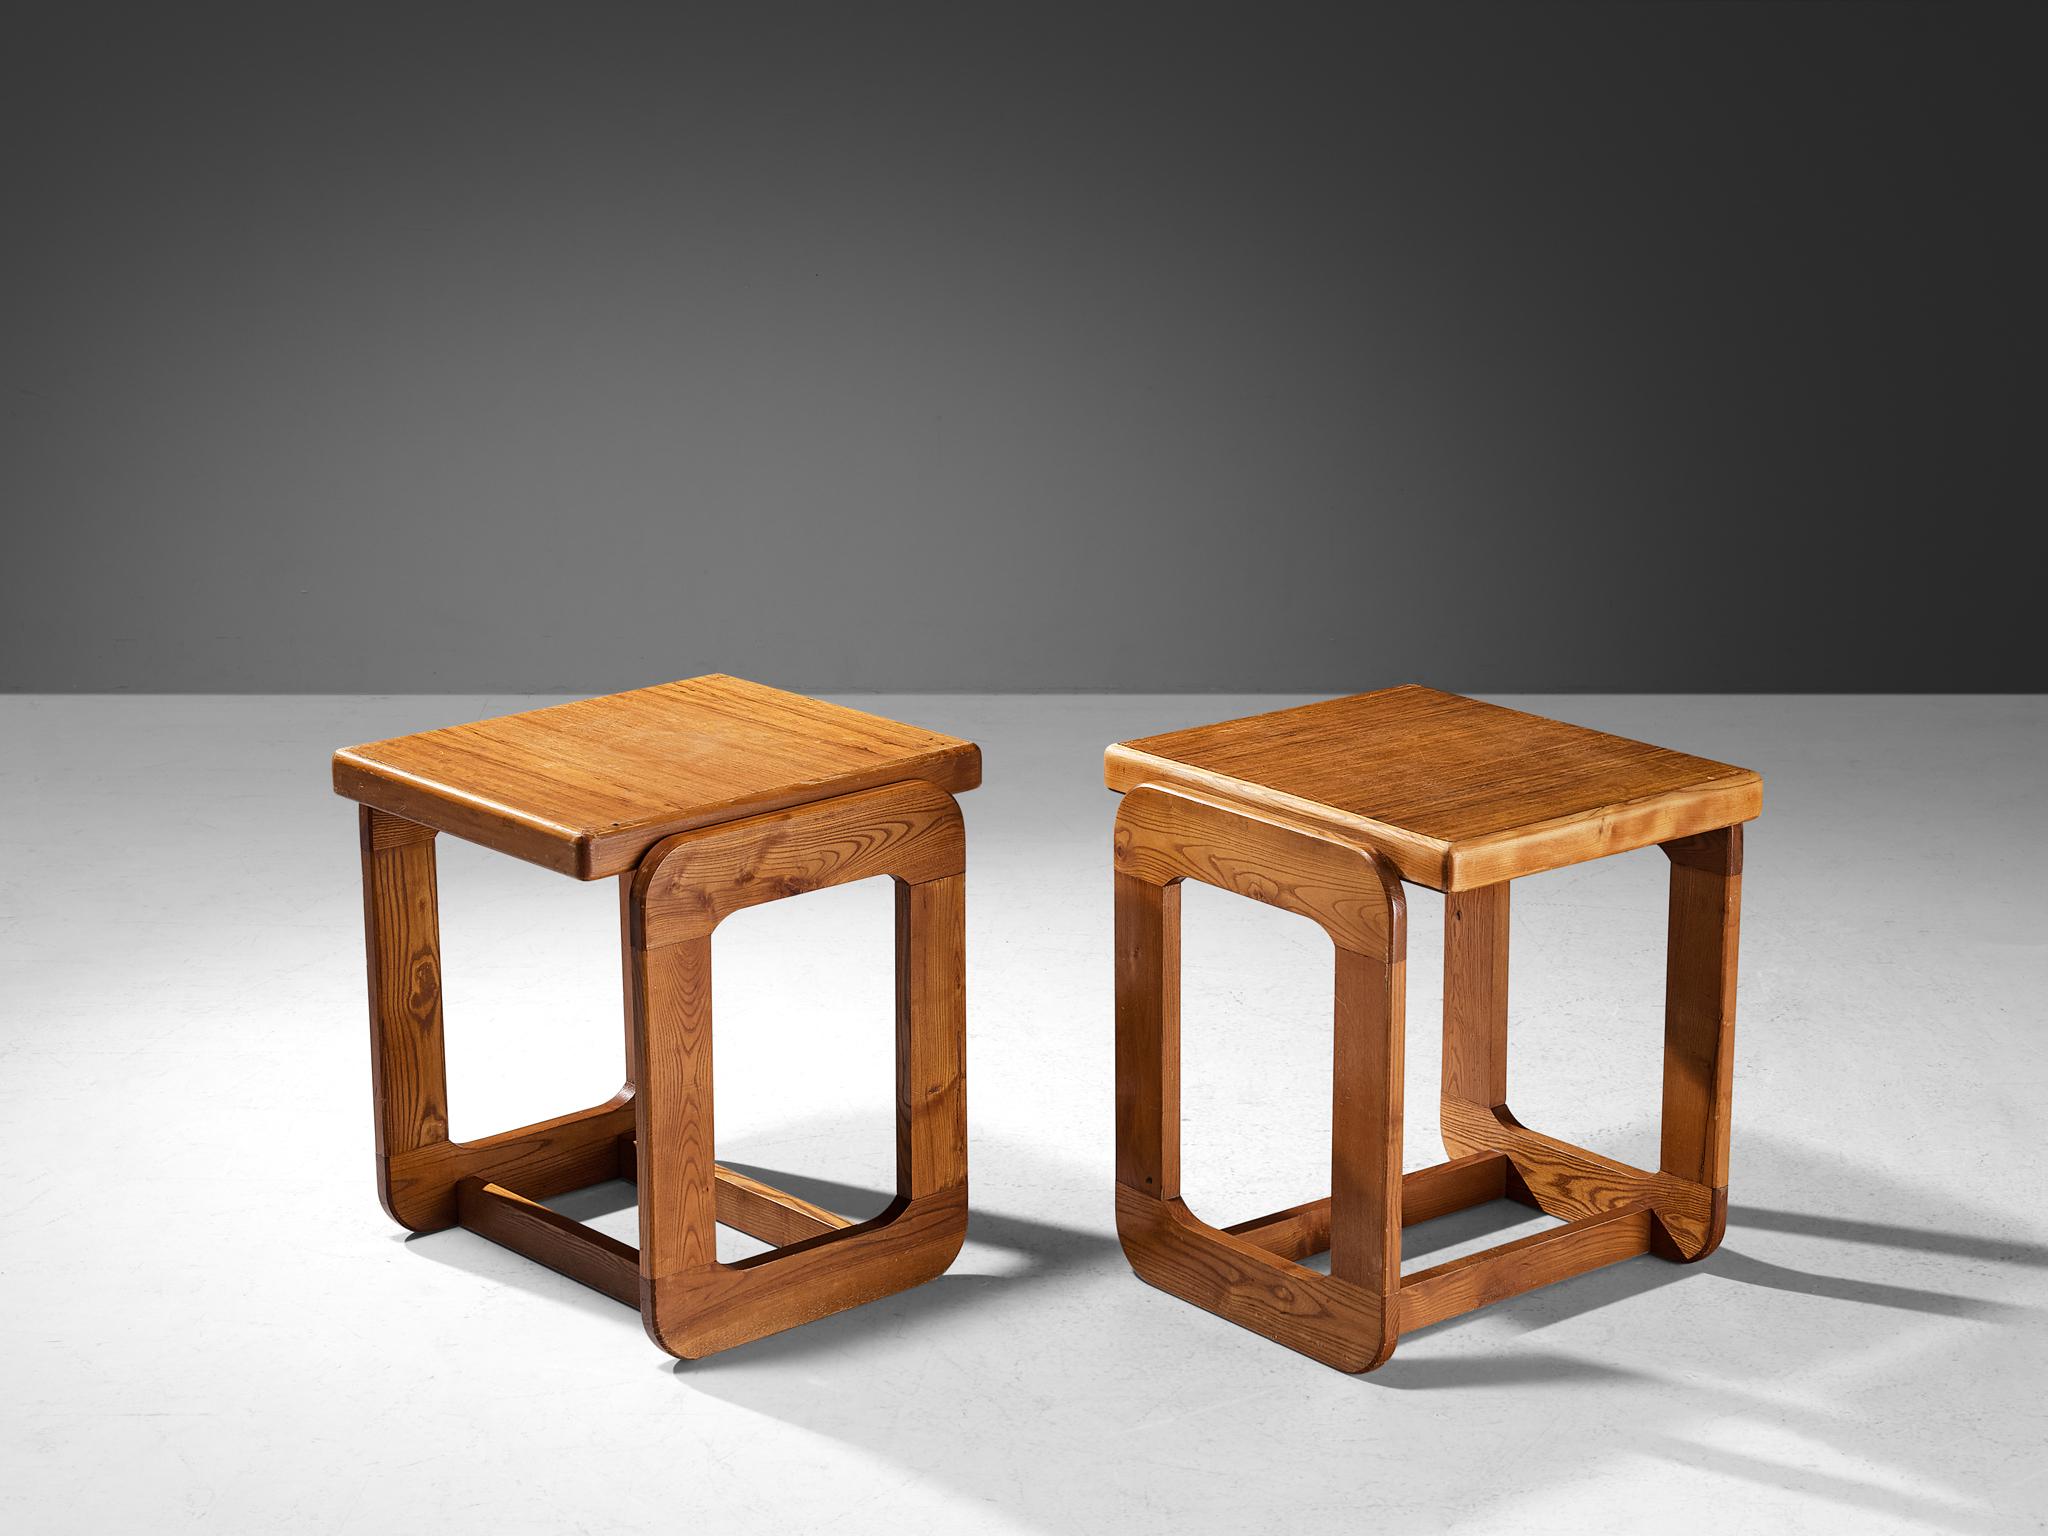 Side tables, ash, Europe, 1970s.

A set of side tables with geometric shapes composed entirely of cubic forms. The frames take on a rectangular shape with open cuts, creating an open and transparent aesthetic within the sturdy structure of the